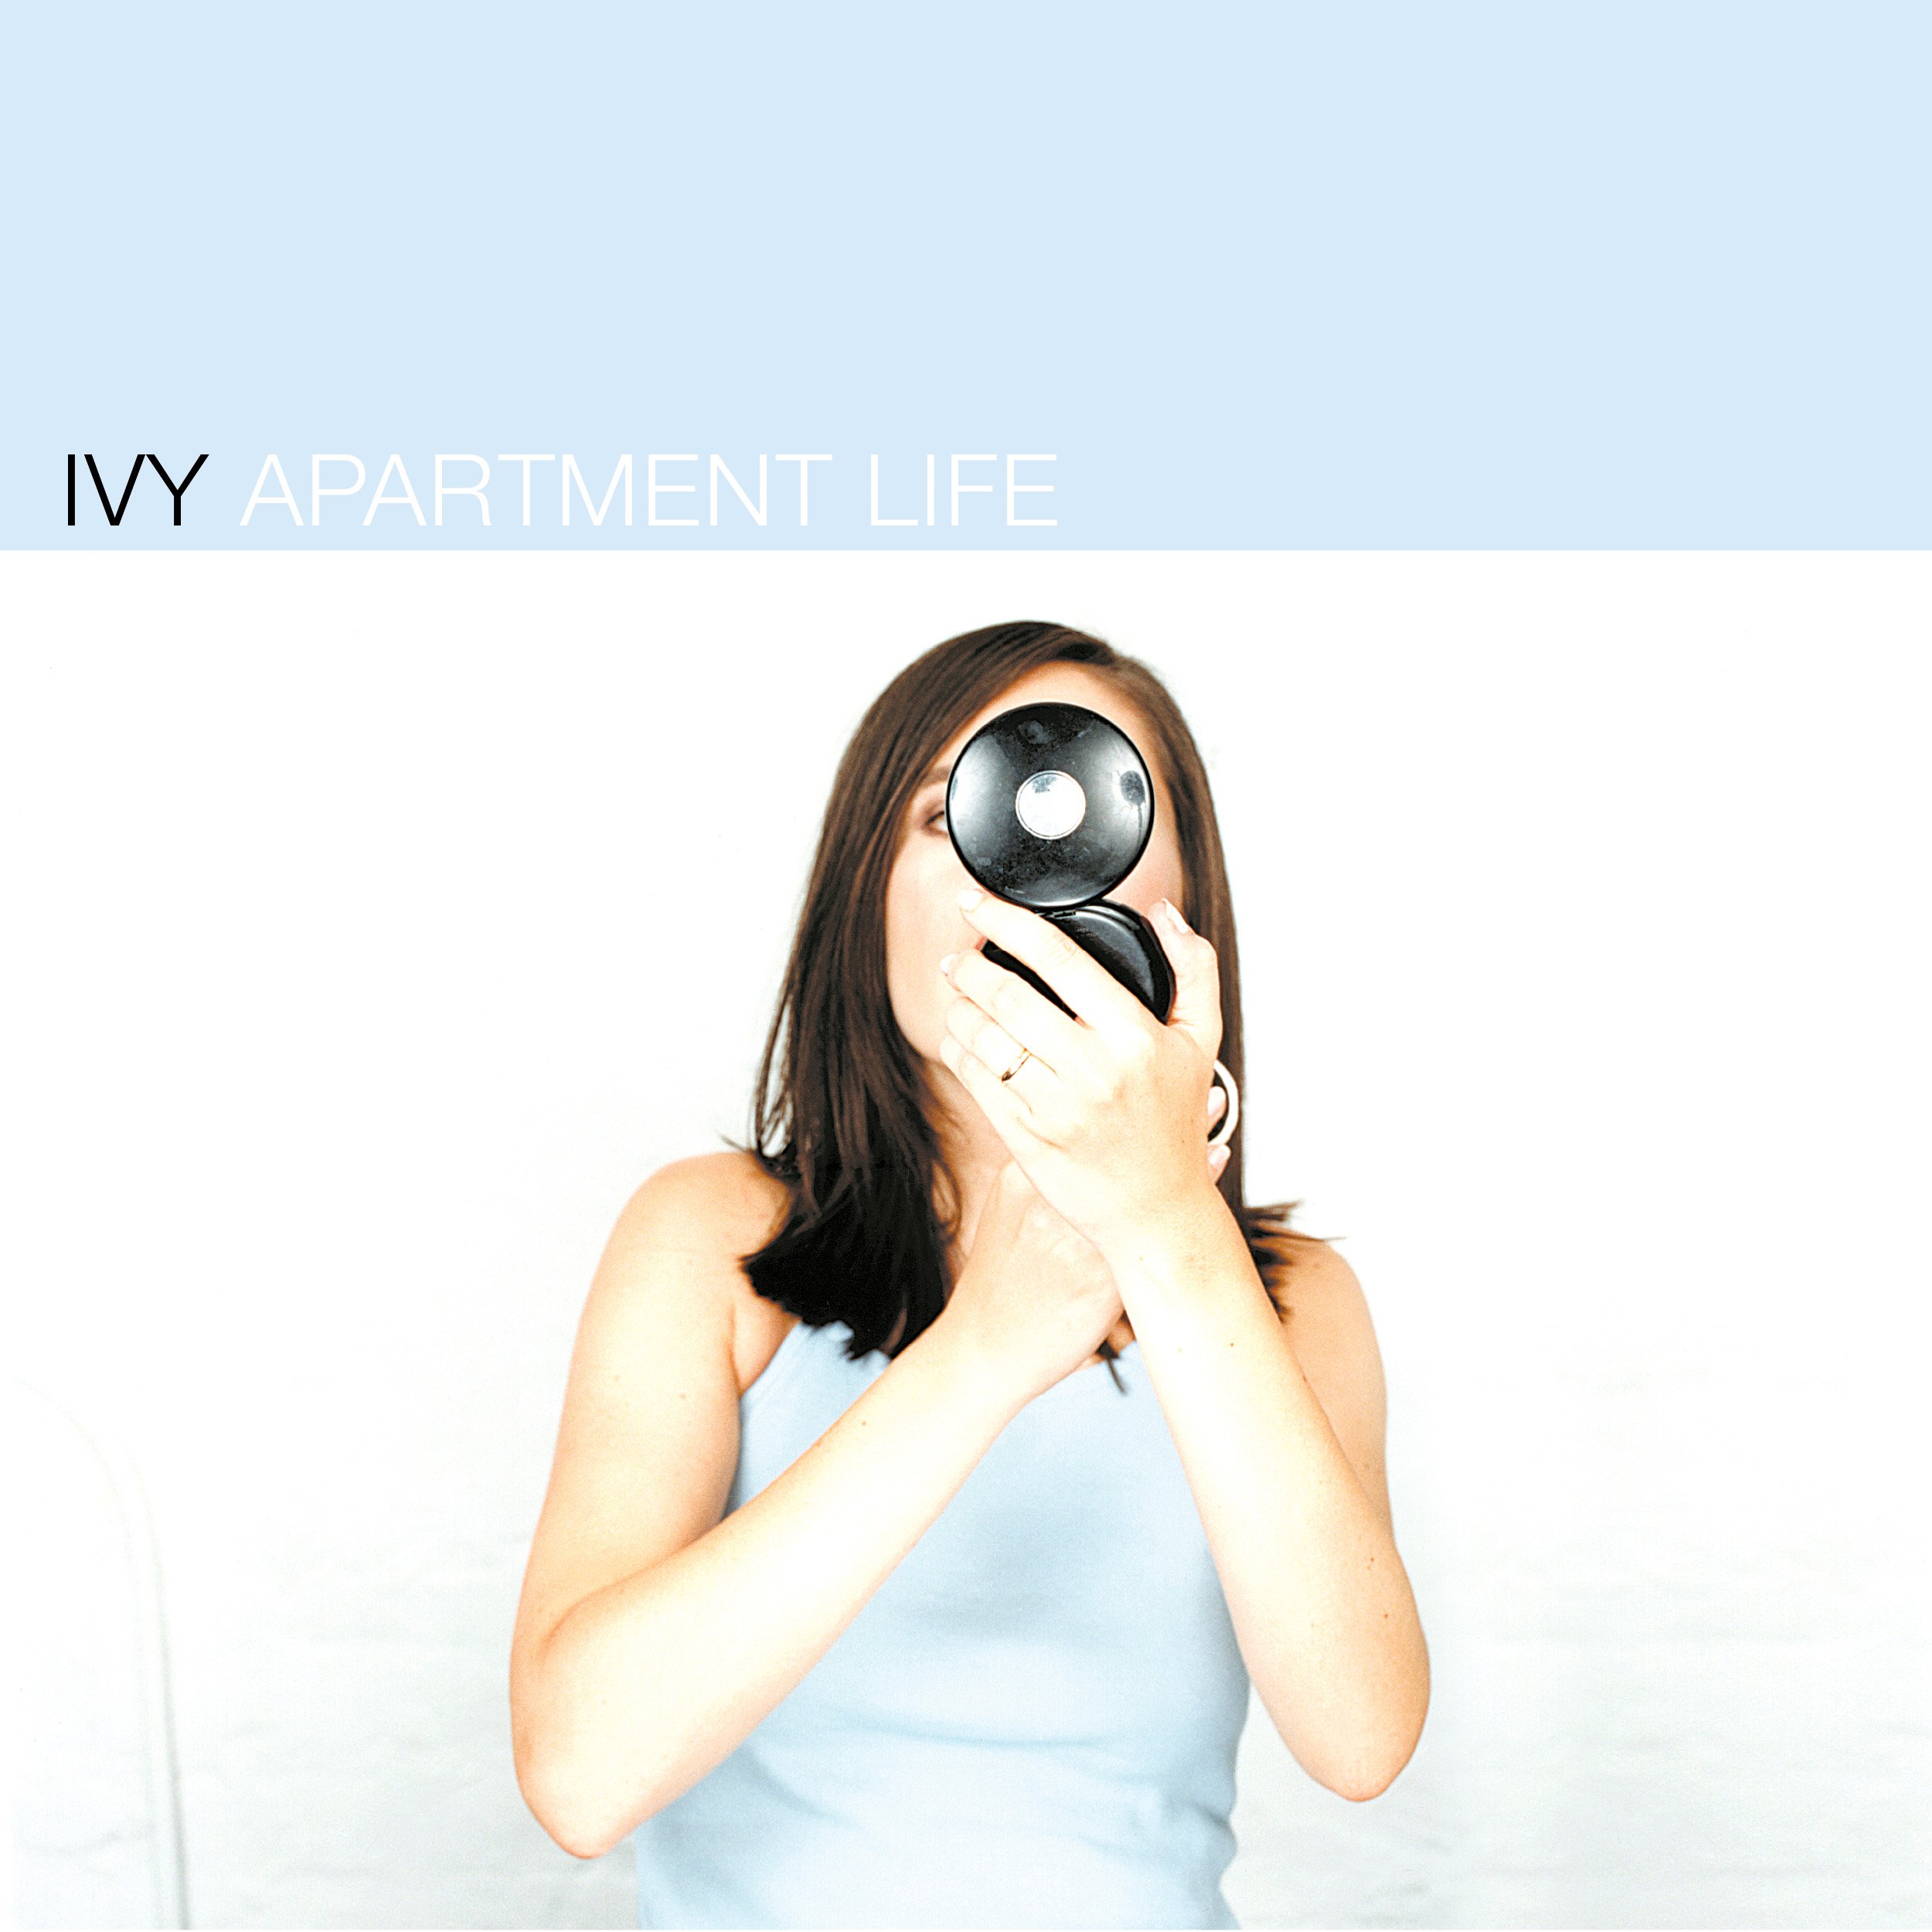 Listen to the 25th Anniversary of "Apartment Life" by Ivy